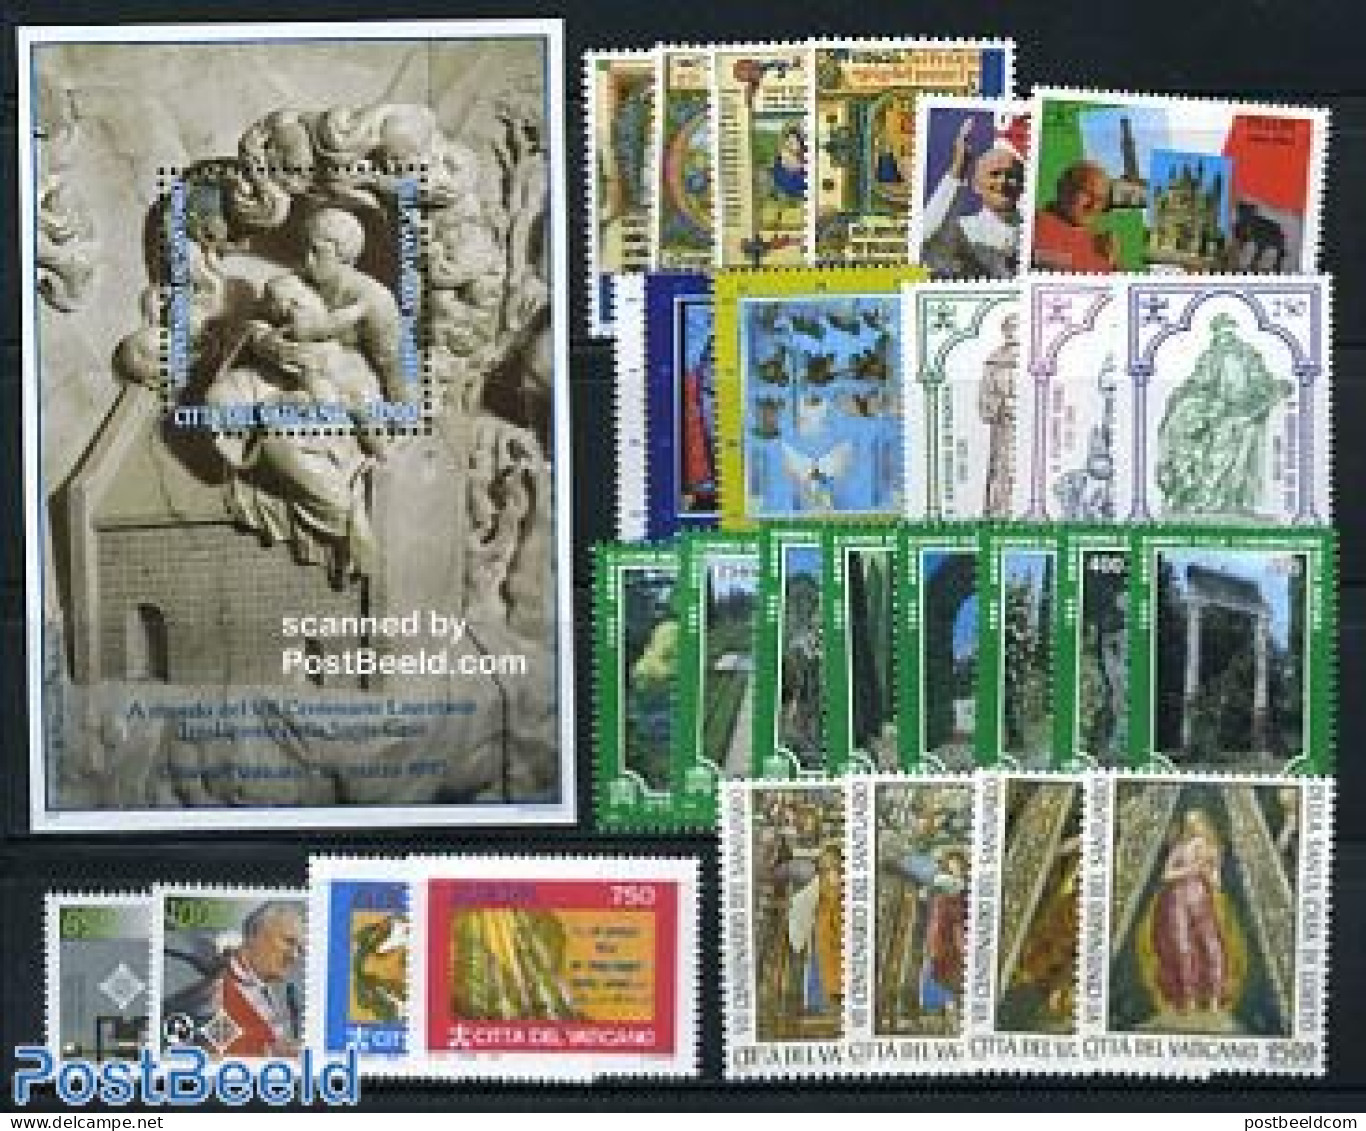 Vatican 1995 Year Set 1995 (30v+1s/s), Mint NH - Unused Stamps